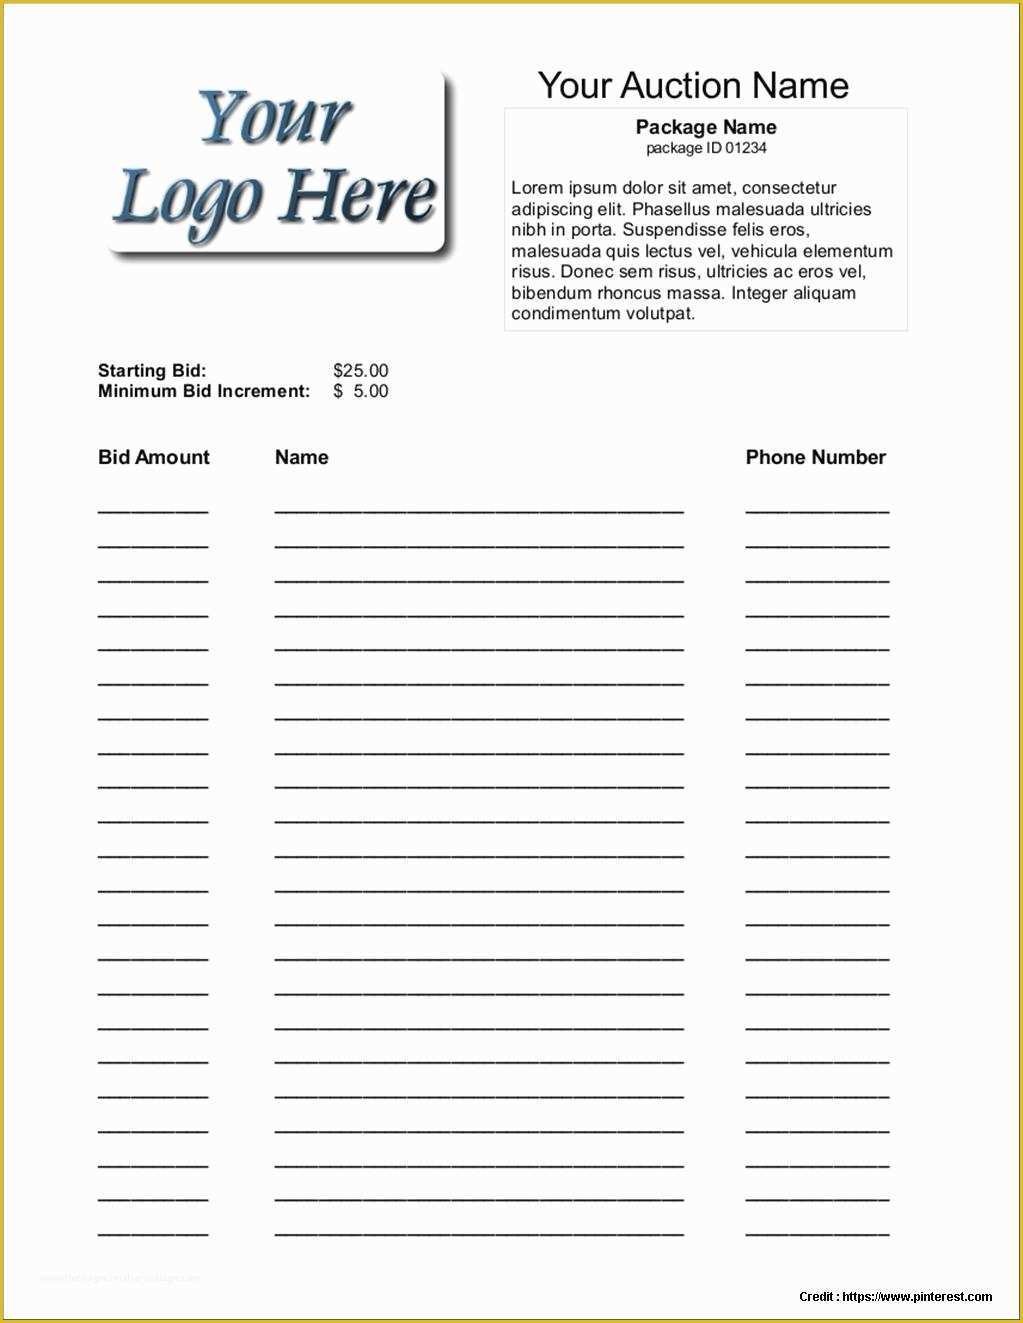 Free Ebay Listing Templates 2017 Of Silent Auction Bidding Sheet form Resume Examples